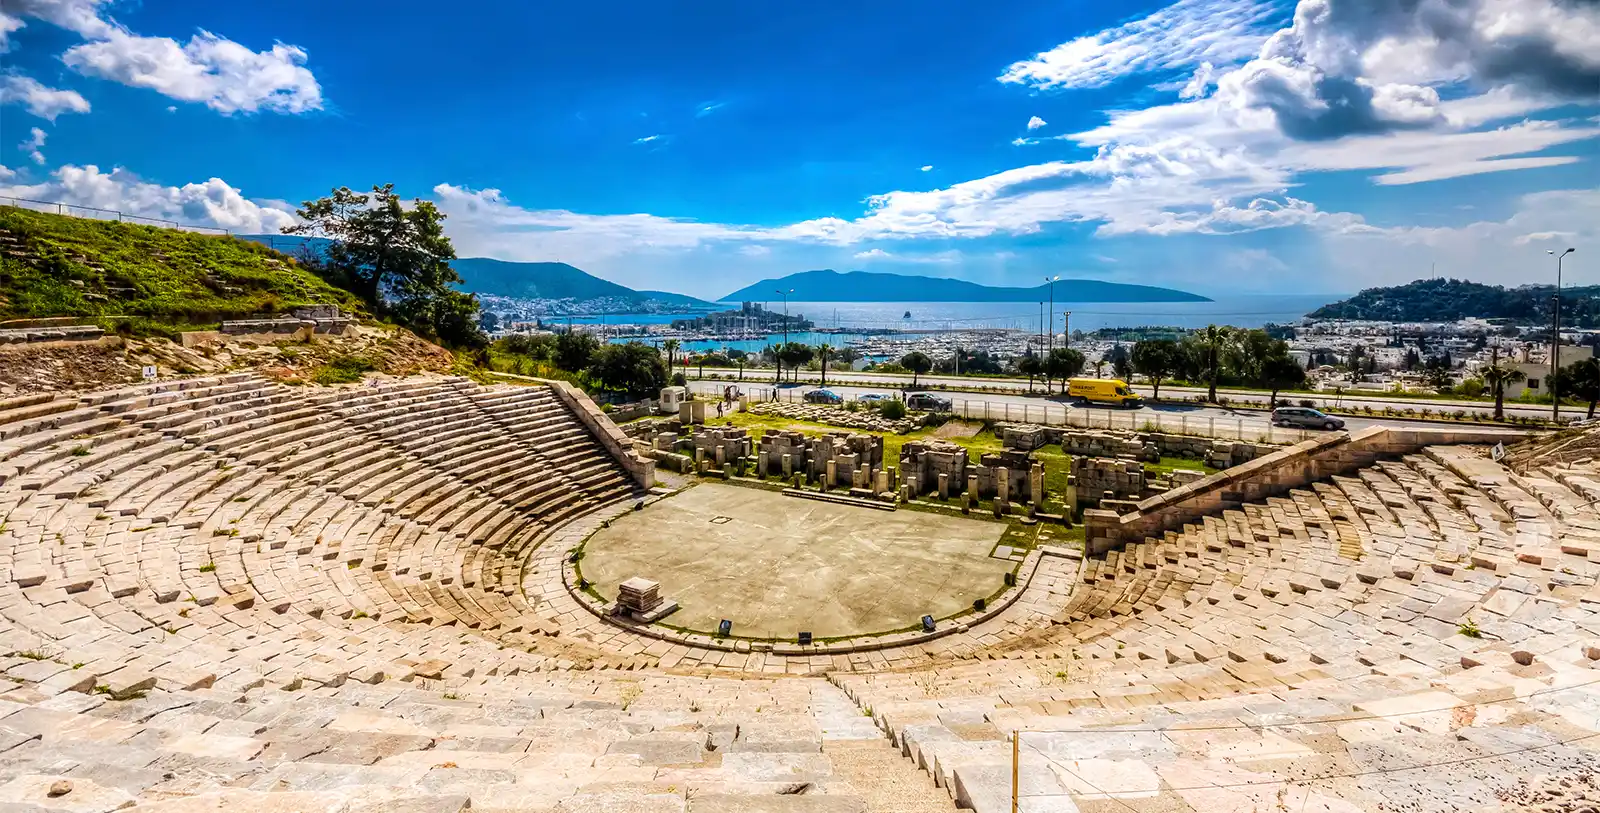 Bodrum Theater has been an important place in Bodrum since a long time ago in history.